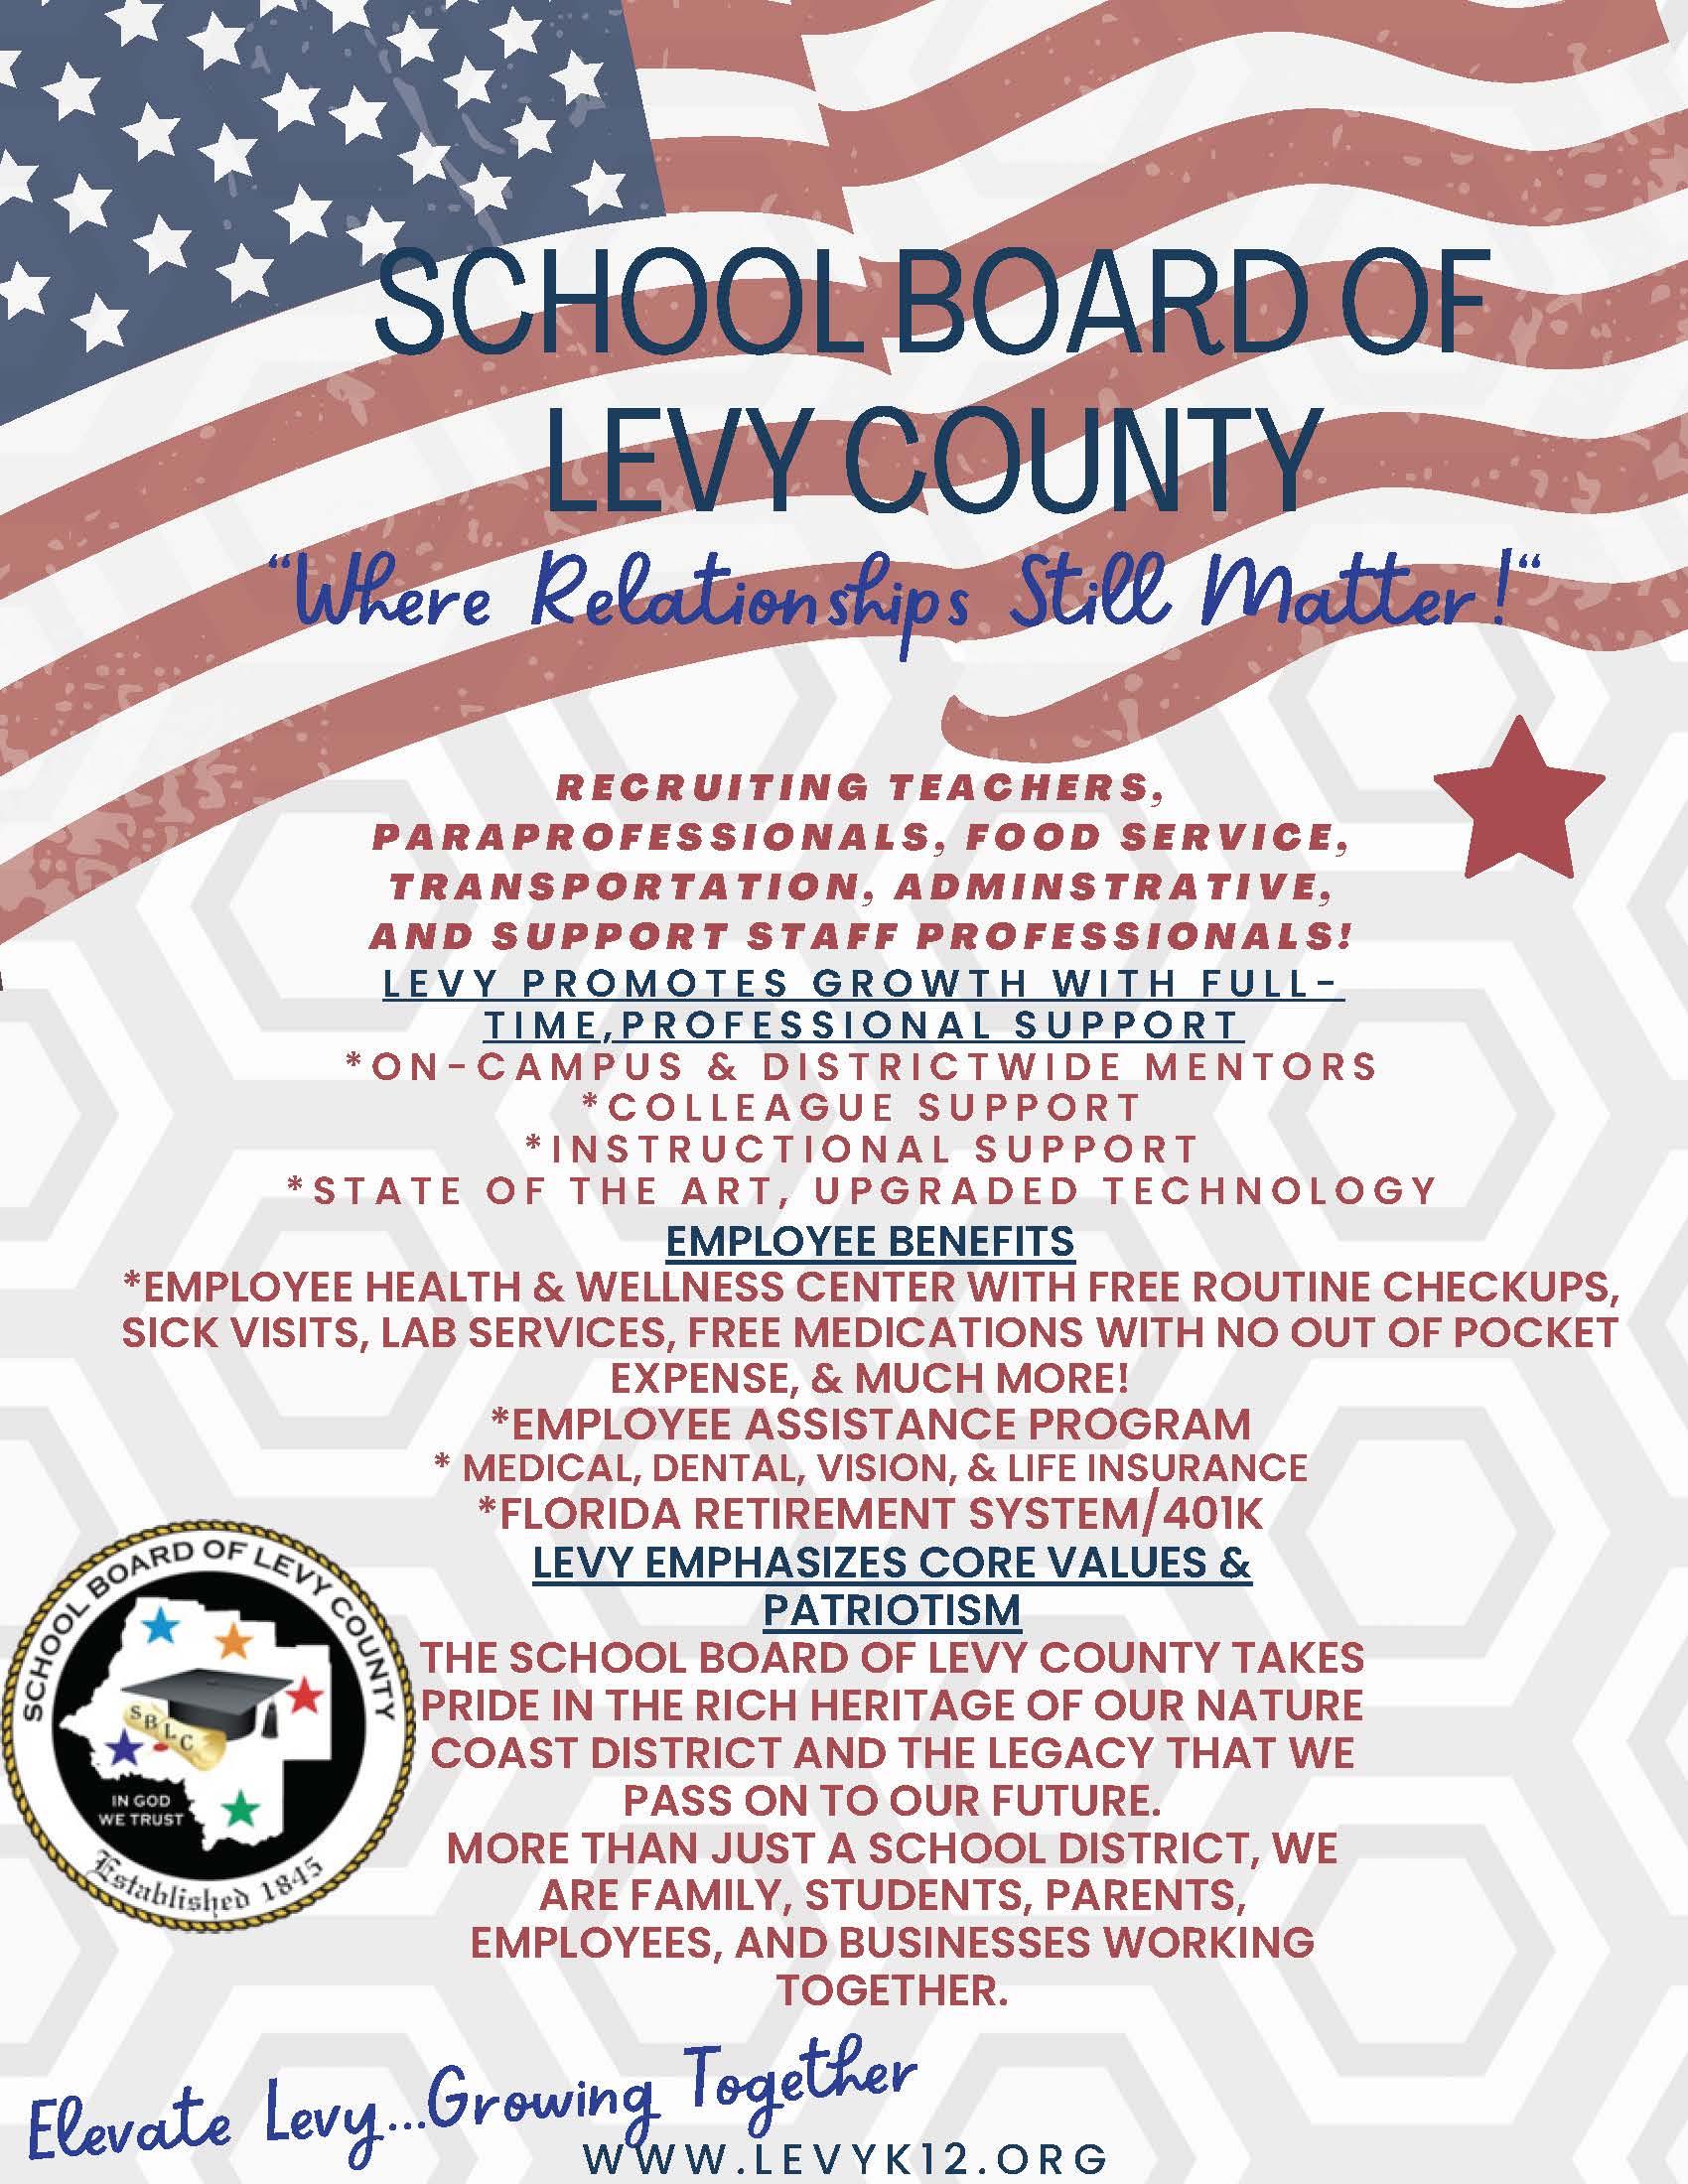 School Board of Levy County - Hiring Reachers, Paraprofessionals, Food Service, and Support Staff